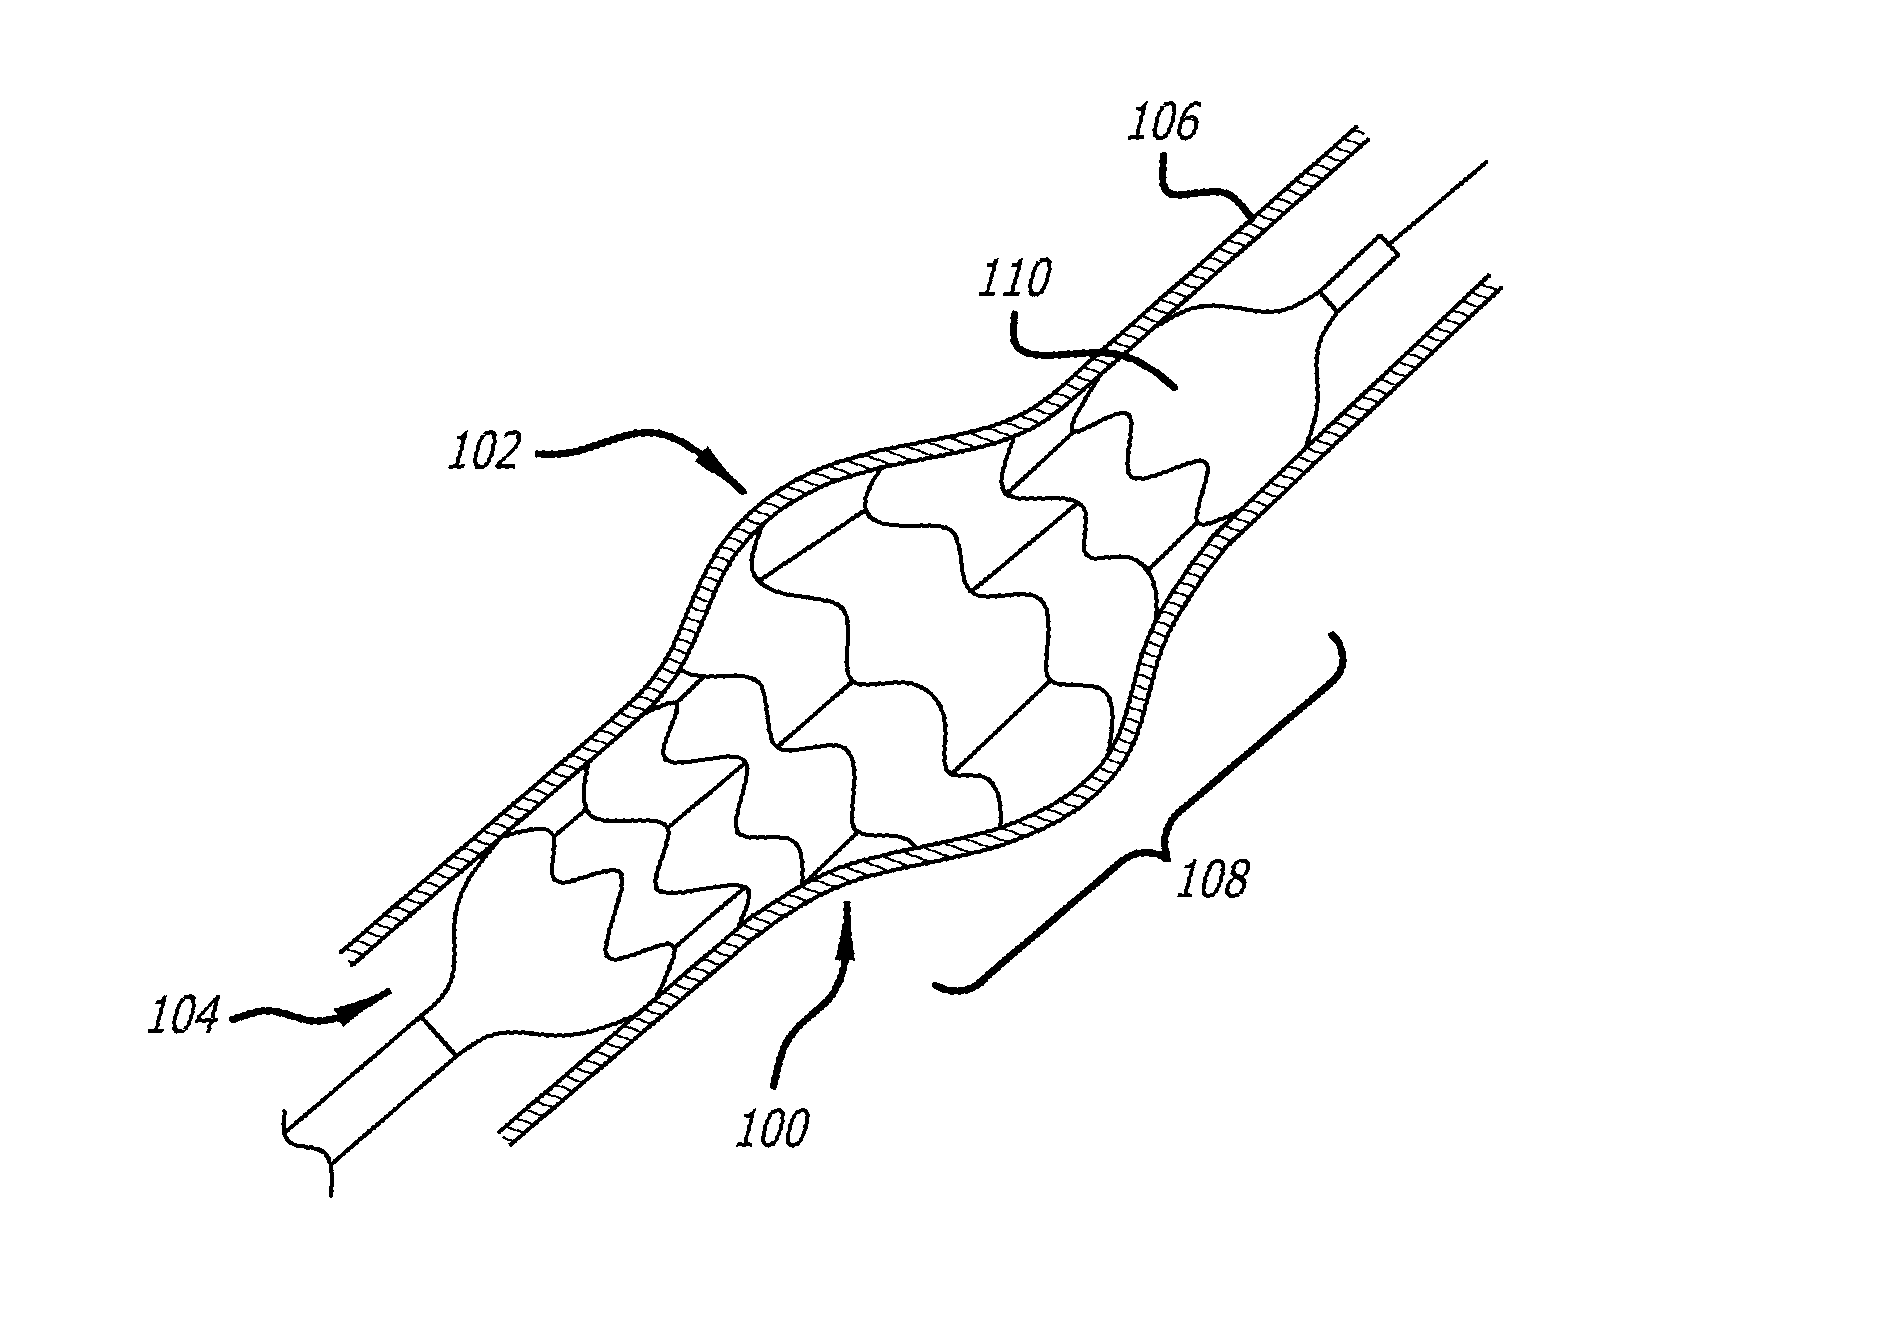 Method of fabricating an intraluminal scaffold with an enlarged portion